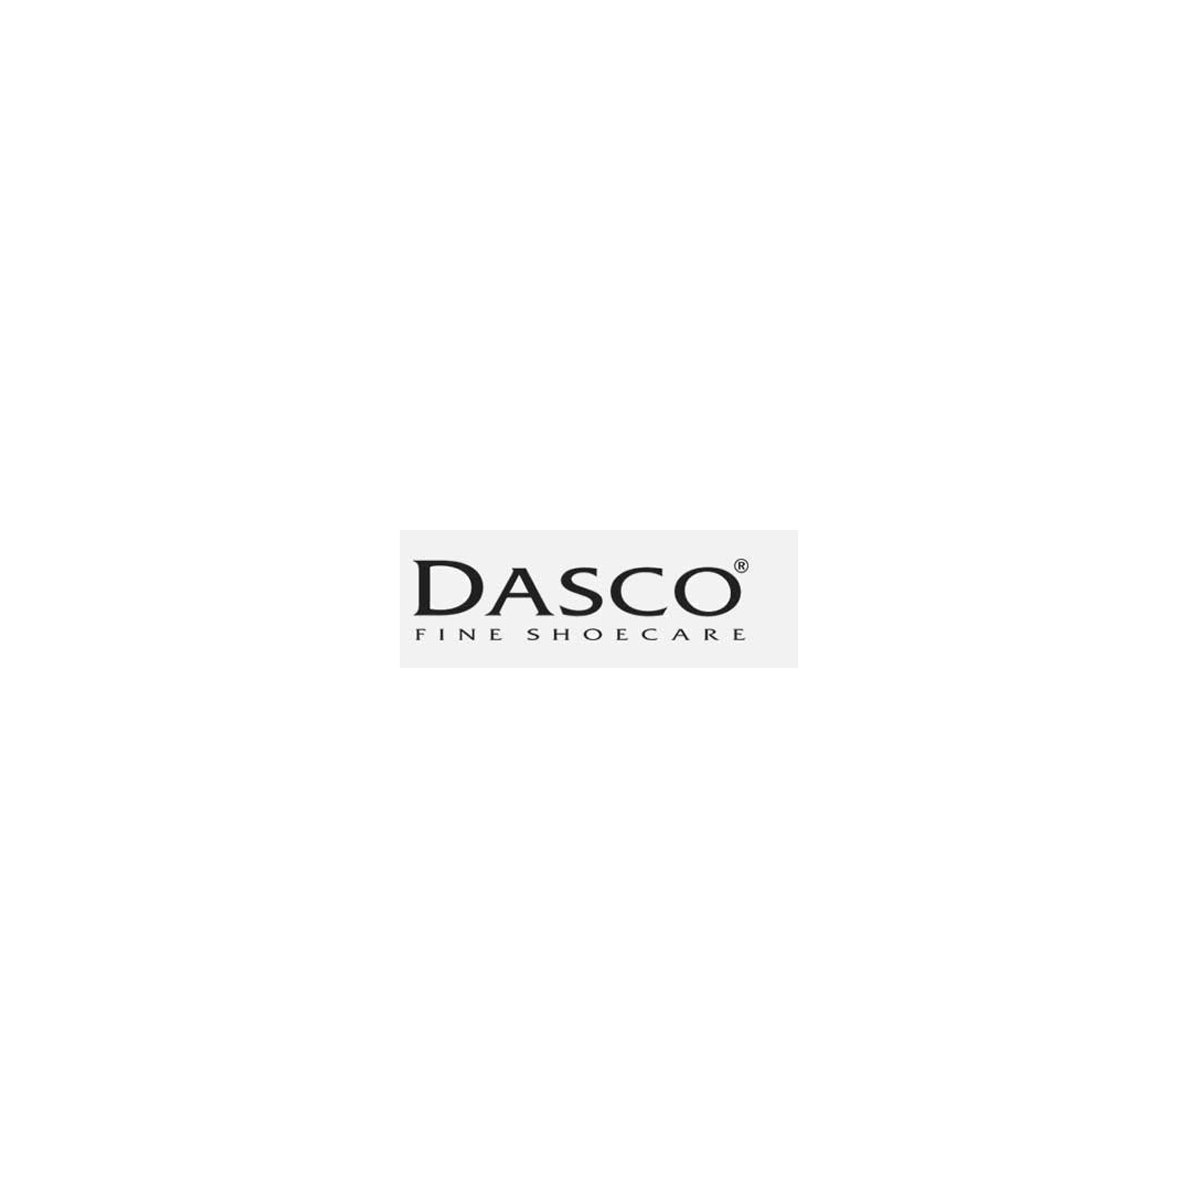 Where to buy Dasco Products